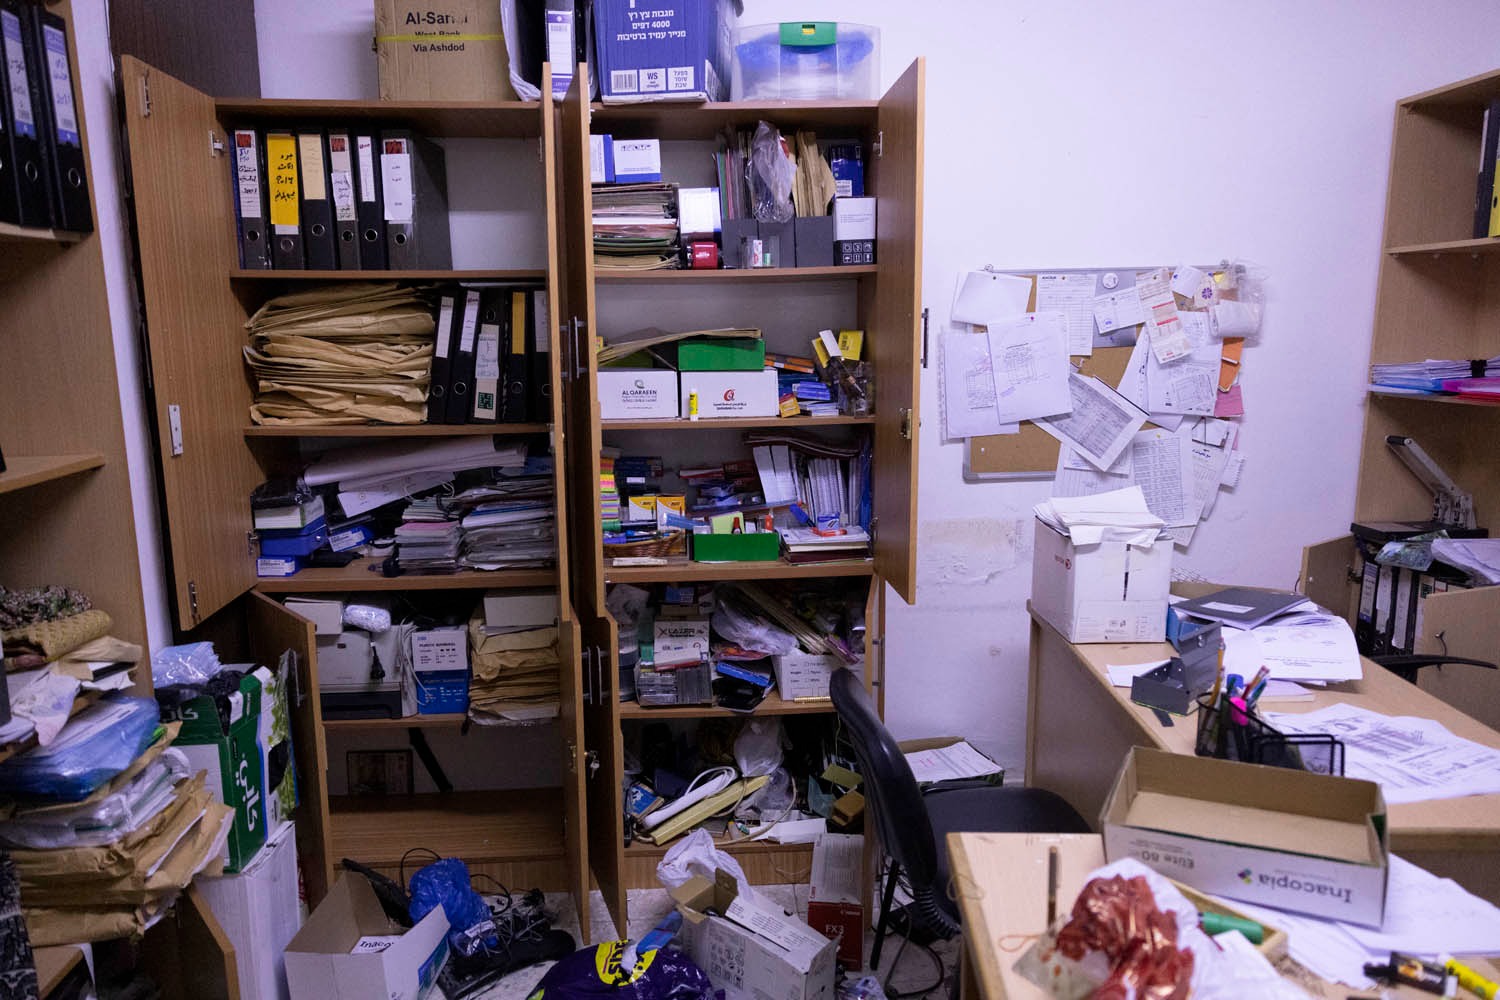 The office of the Union of Palestinian Women's Committees following an Israeli army raid, Ramallah, West Bank, August 18, 2022. Photo: Oren Ziv.